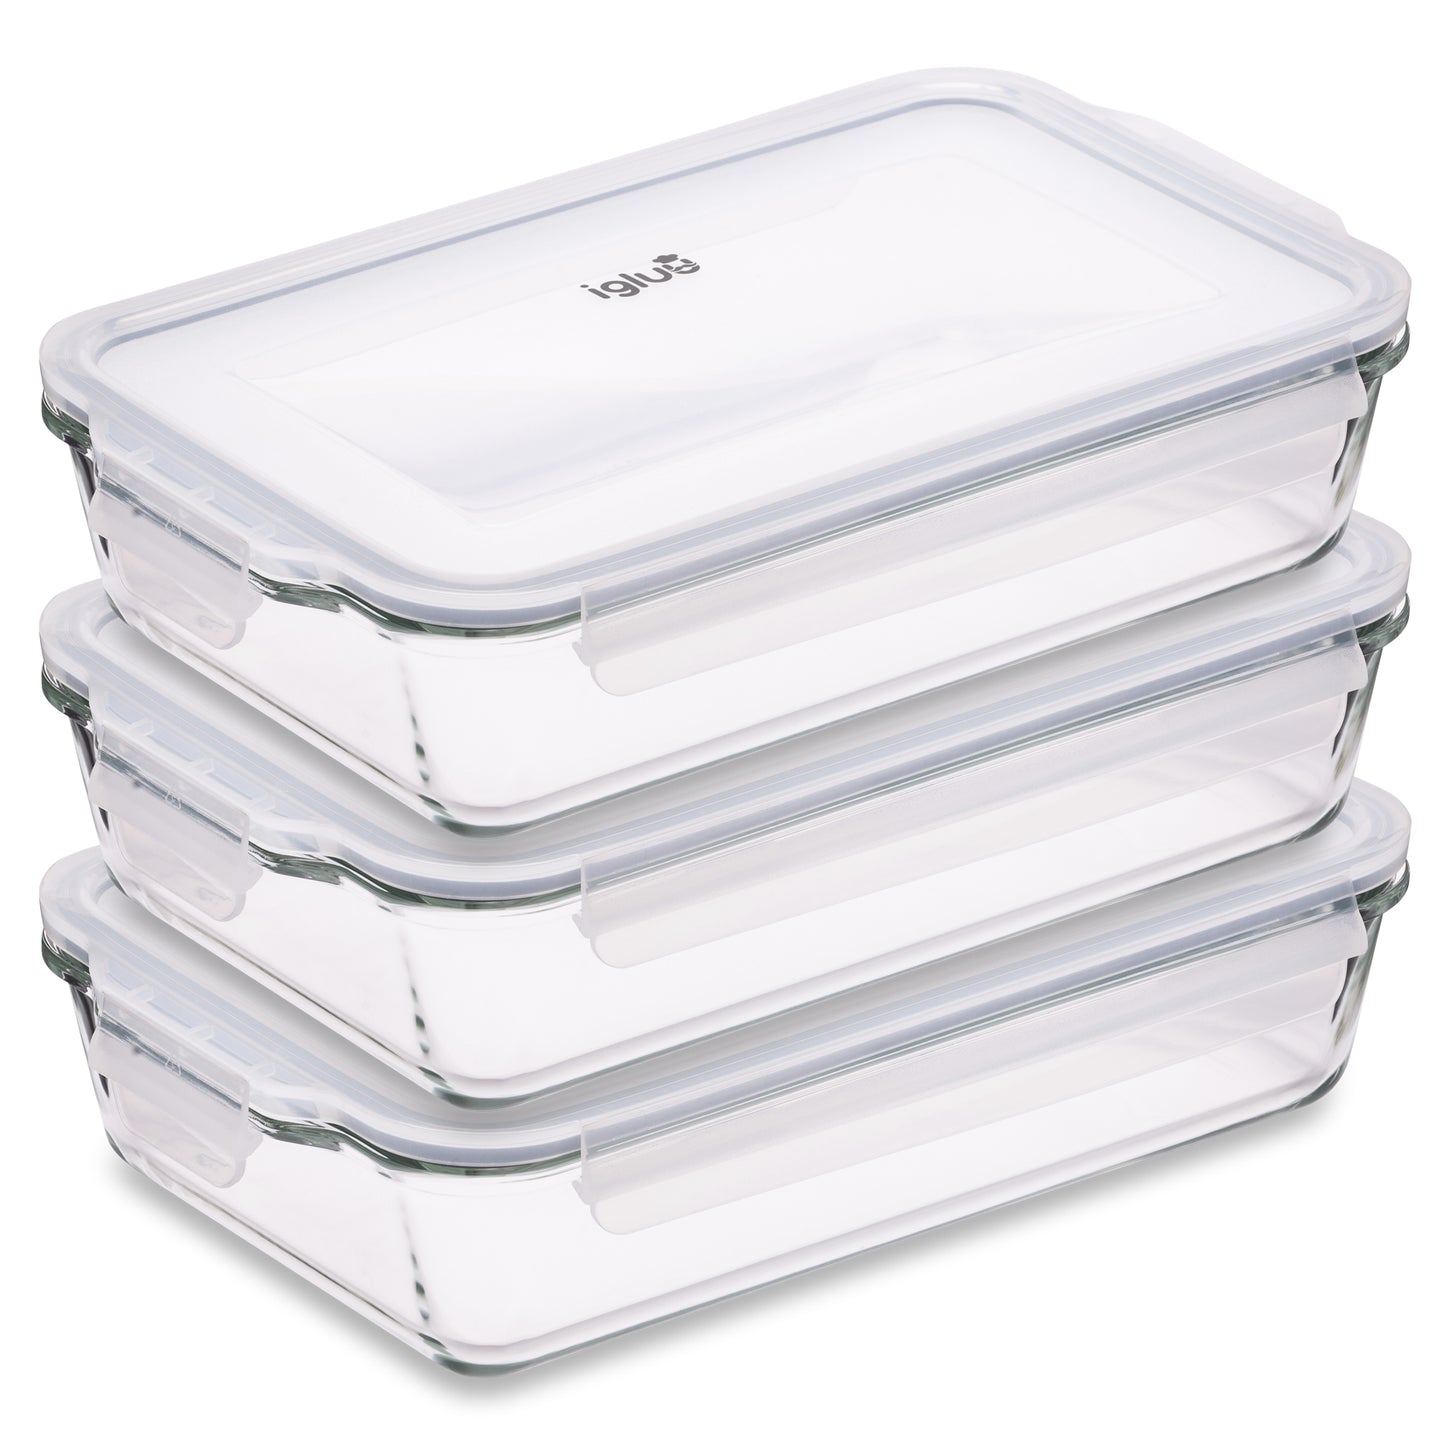 Glass Lasagne Dish with Lid - 2.2 litre